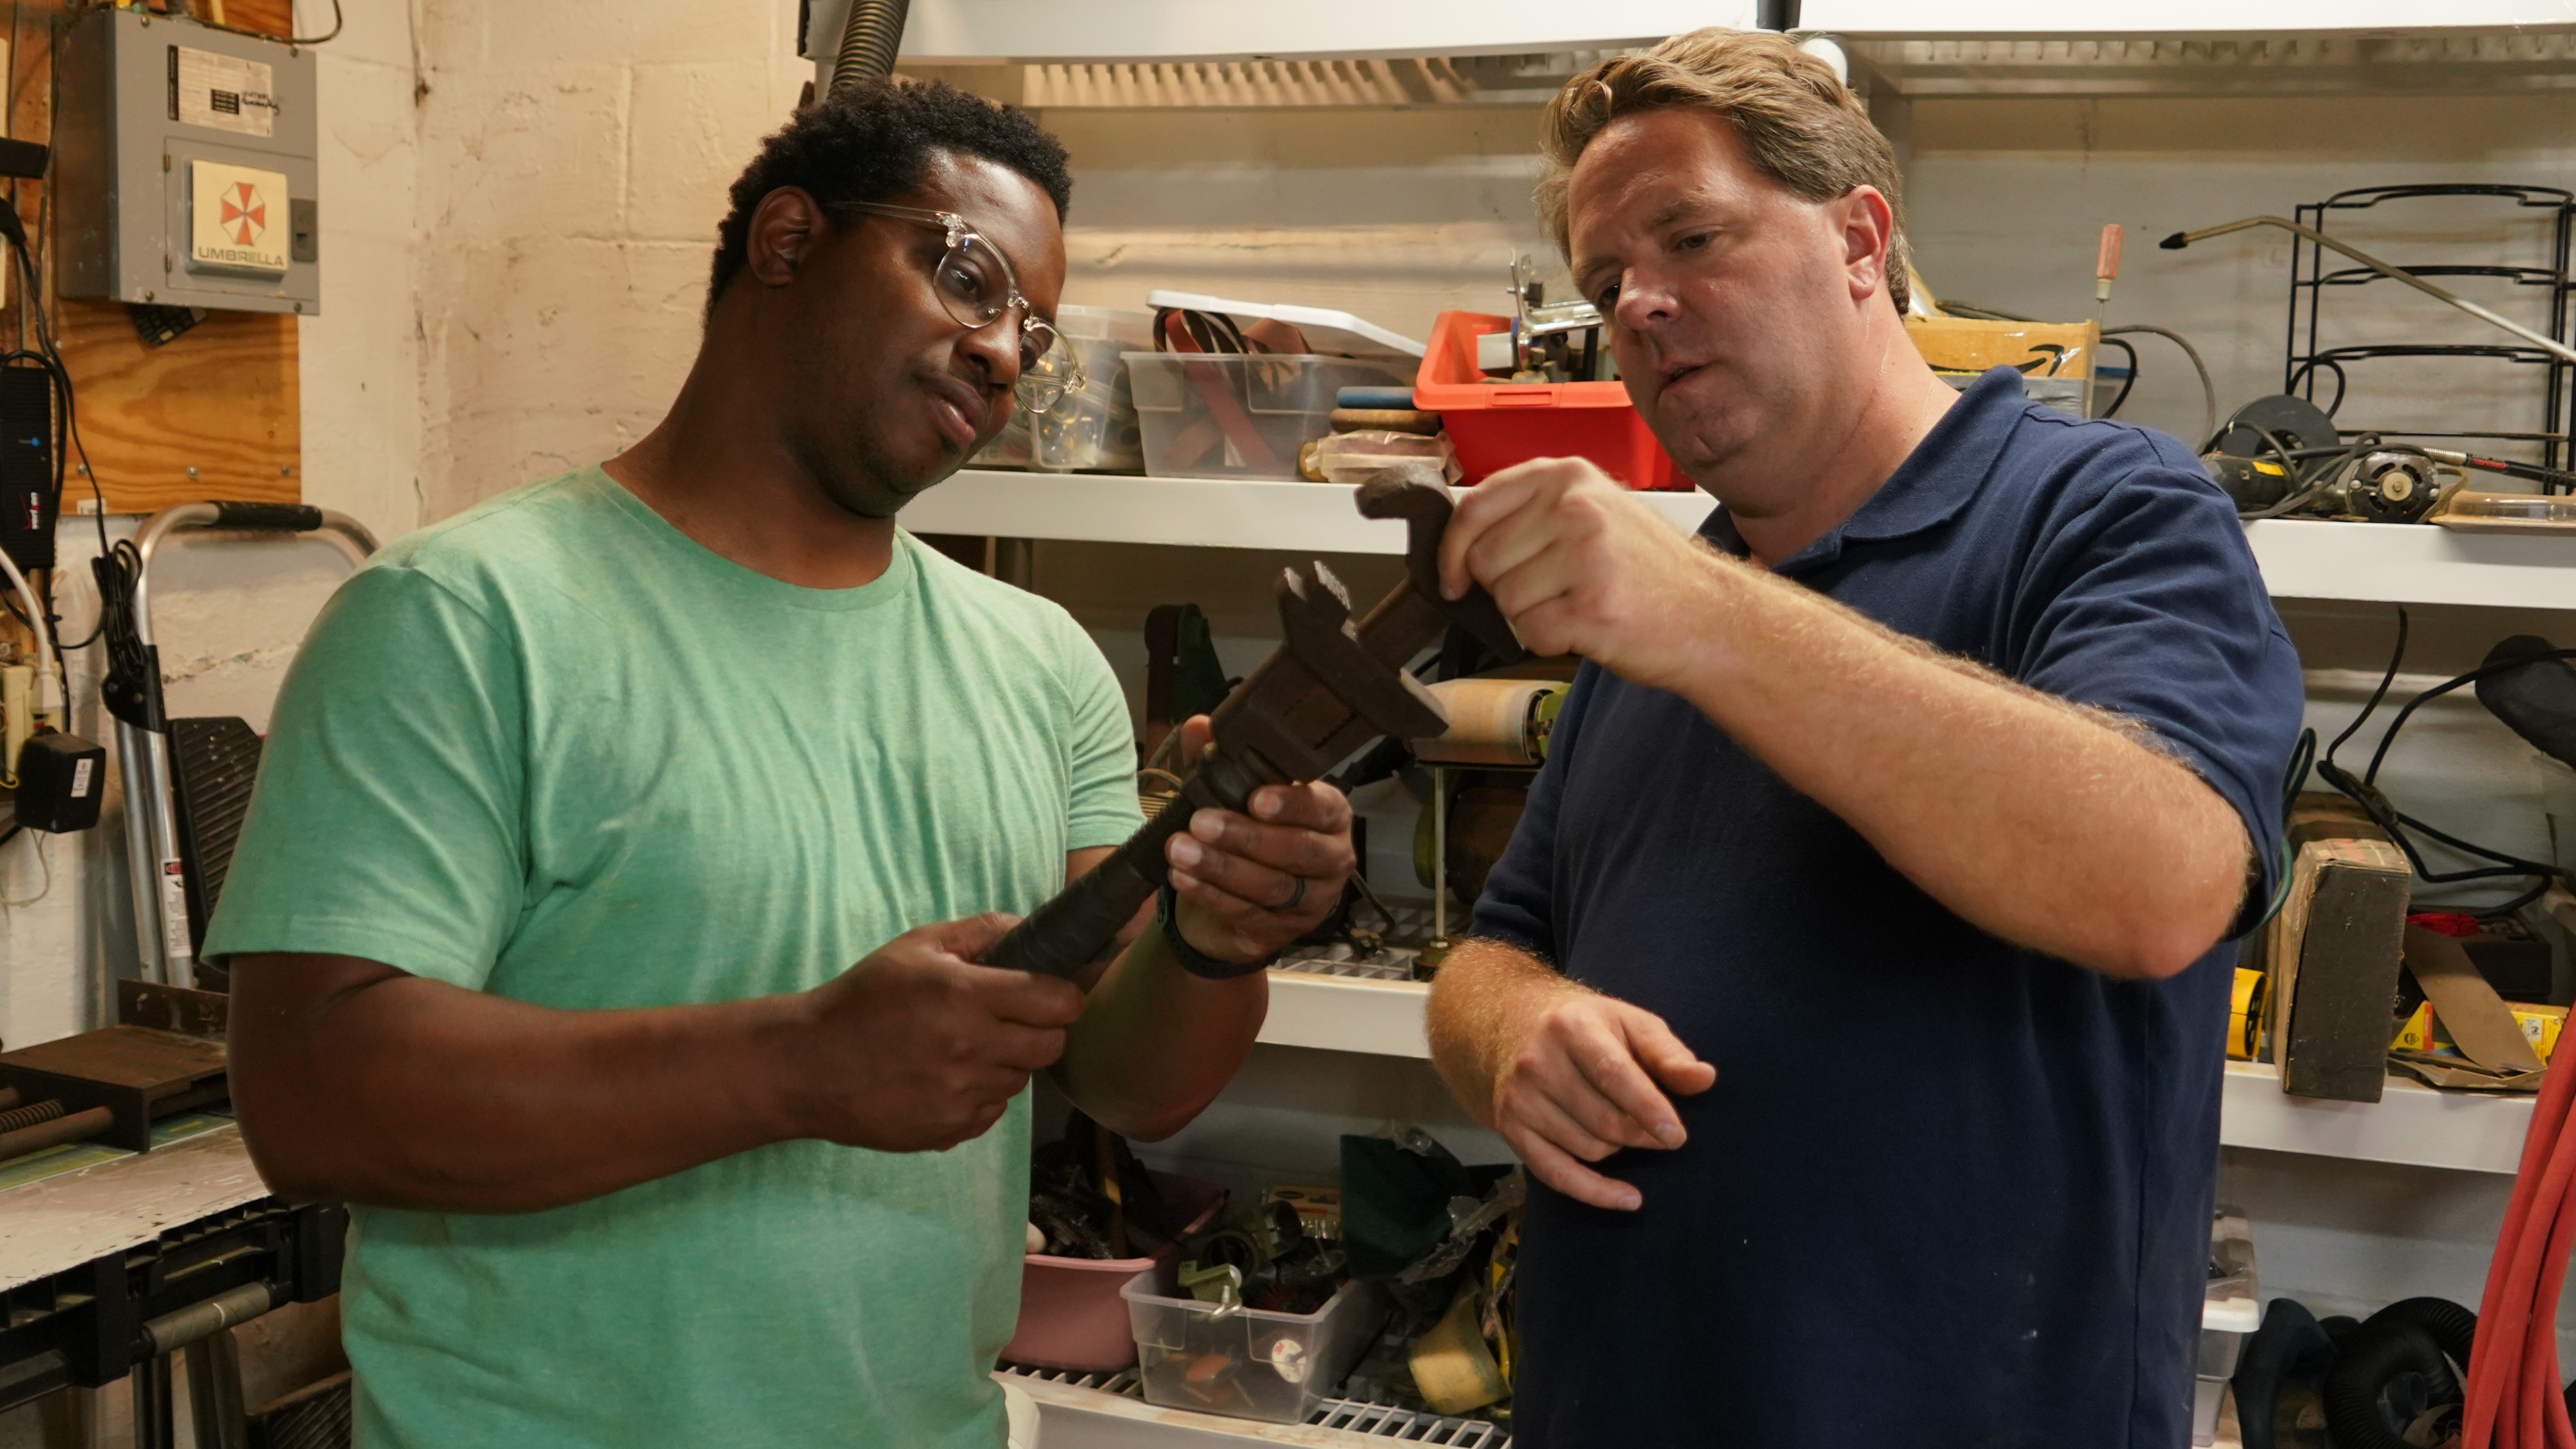 Avi Hopkins (left) and Matt Paxton (right) inspect a wrench found in a Texas home. Photo Credits: Matthew Torti